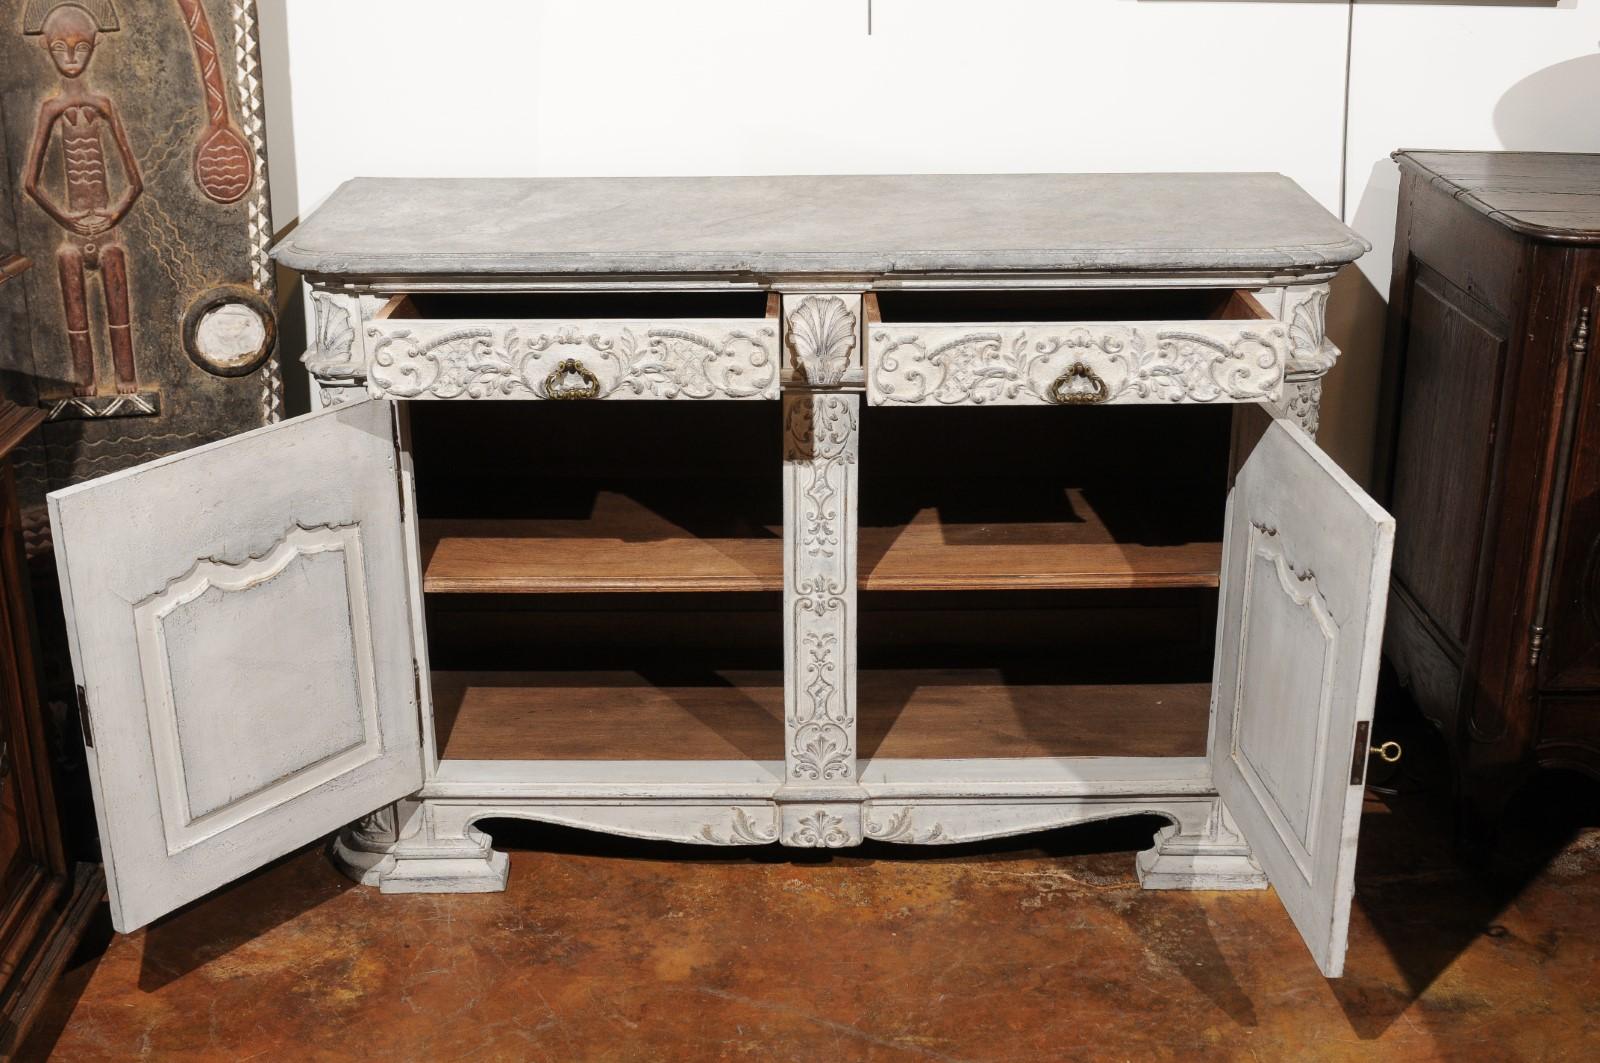 19th Century Rococo Style 1850s Belgian Painted Buffet with Drawers, Doors and Carved Décor